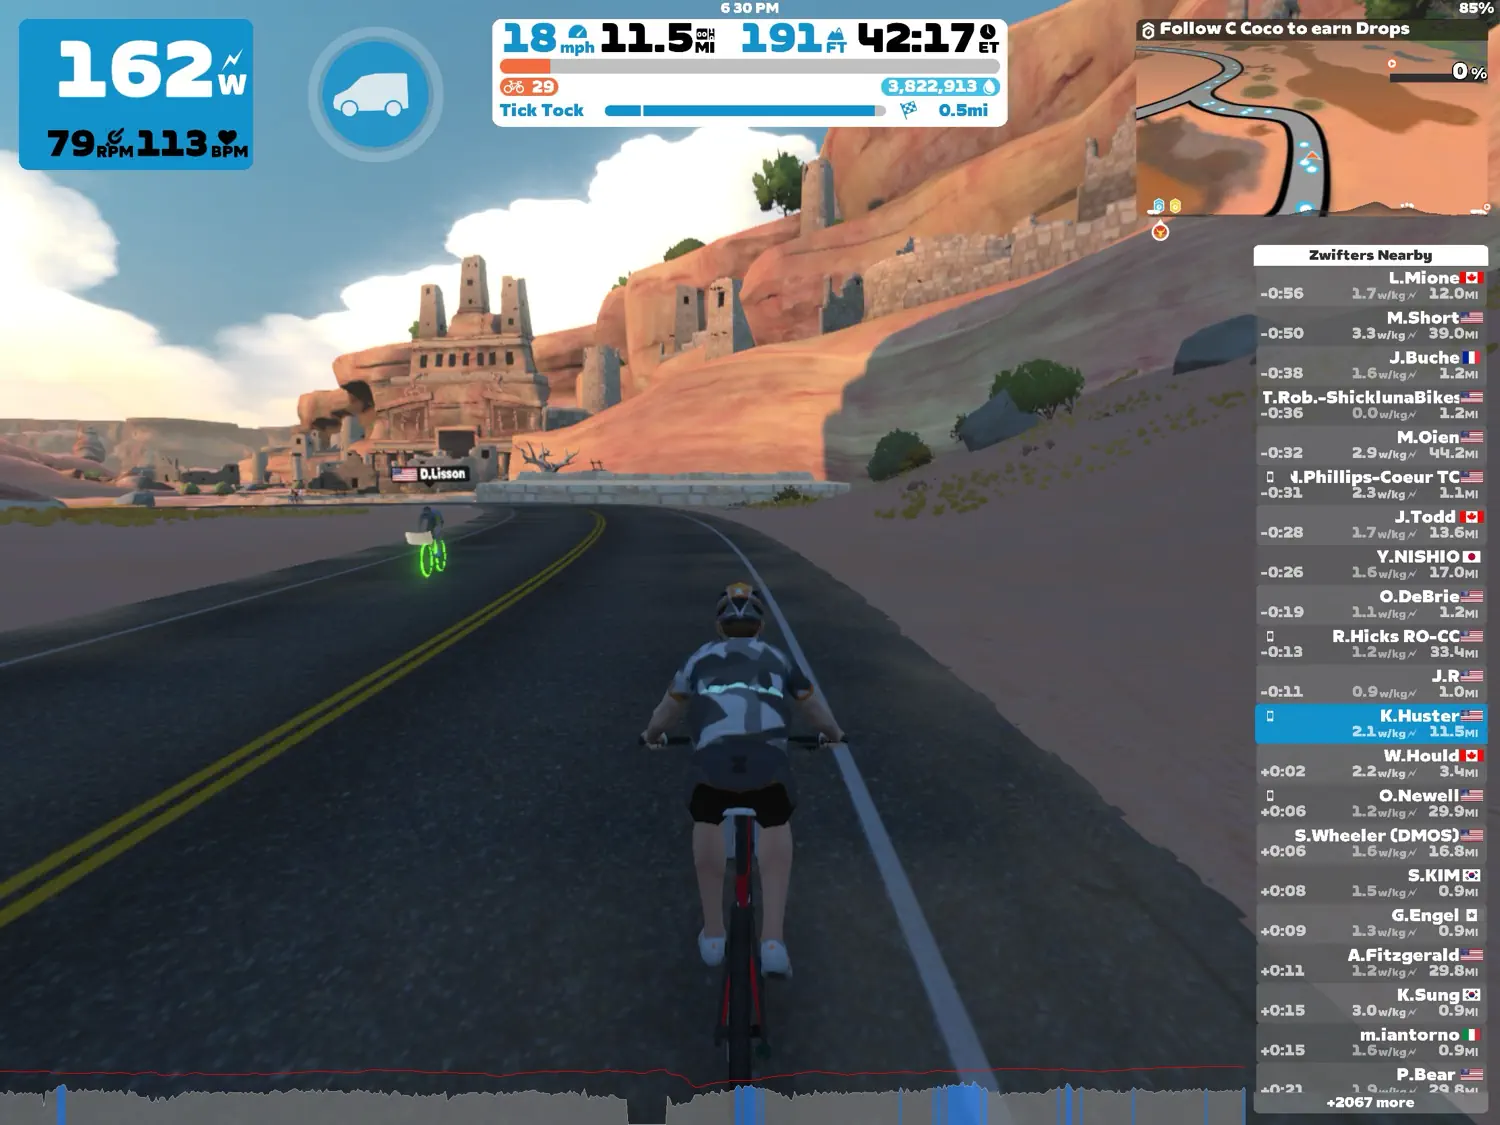 Keith is cruising along at a low-power level during his Zwift training ride